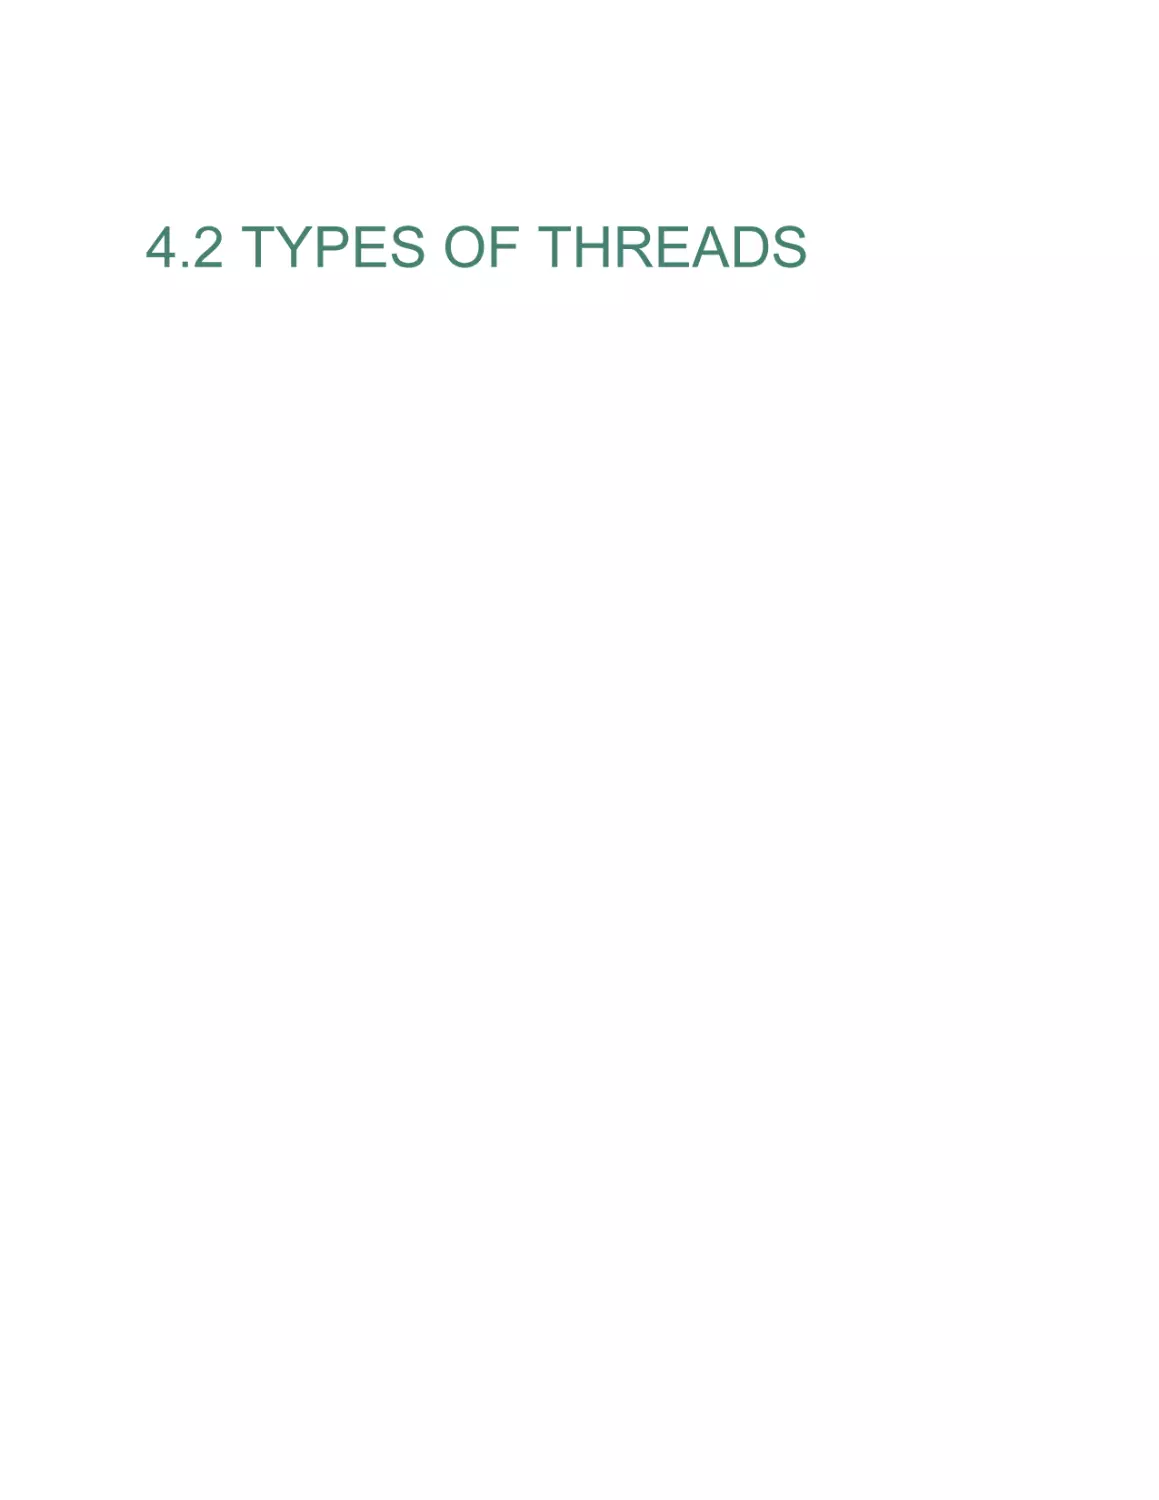 4.2 TYPES OF THREADS